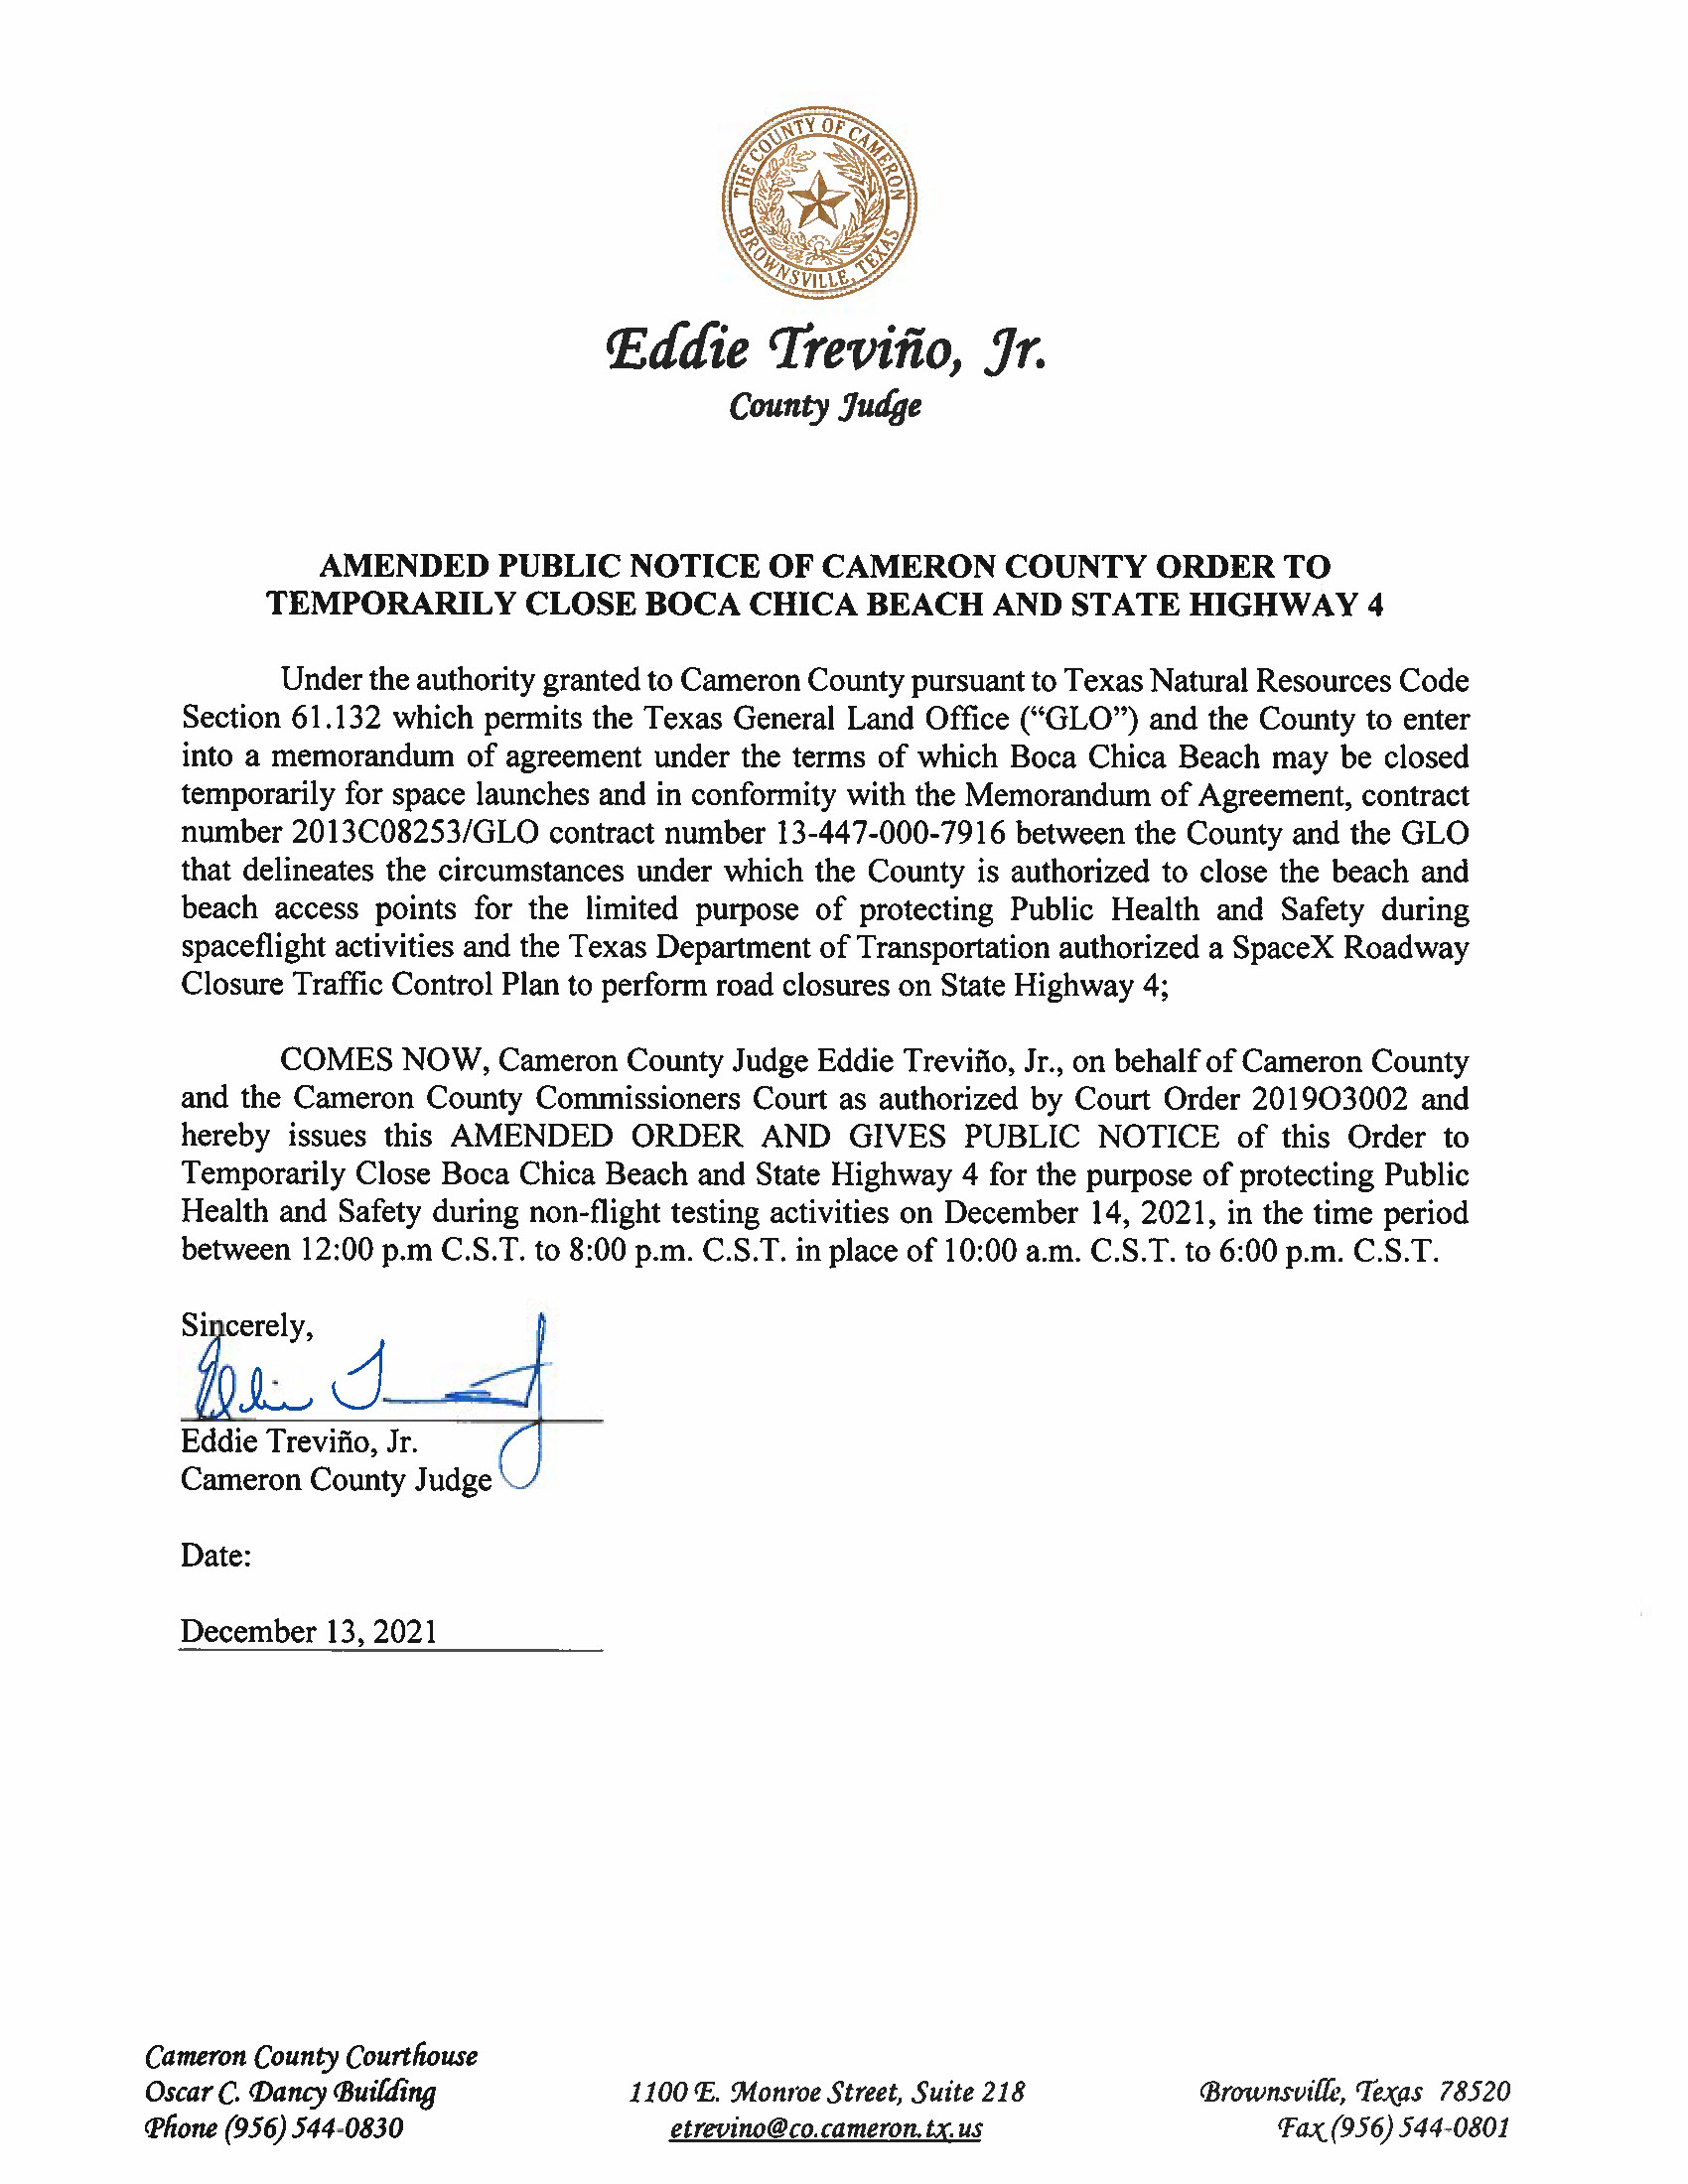 AMENDMENT PUBLIC NOTICE OF CAMERON COUNTY ORDER TO TEMP. BEACH CLOSURE AND HWY.12.14.2021